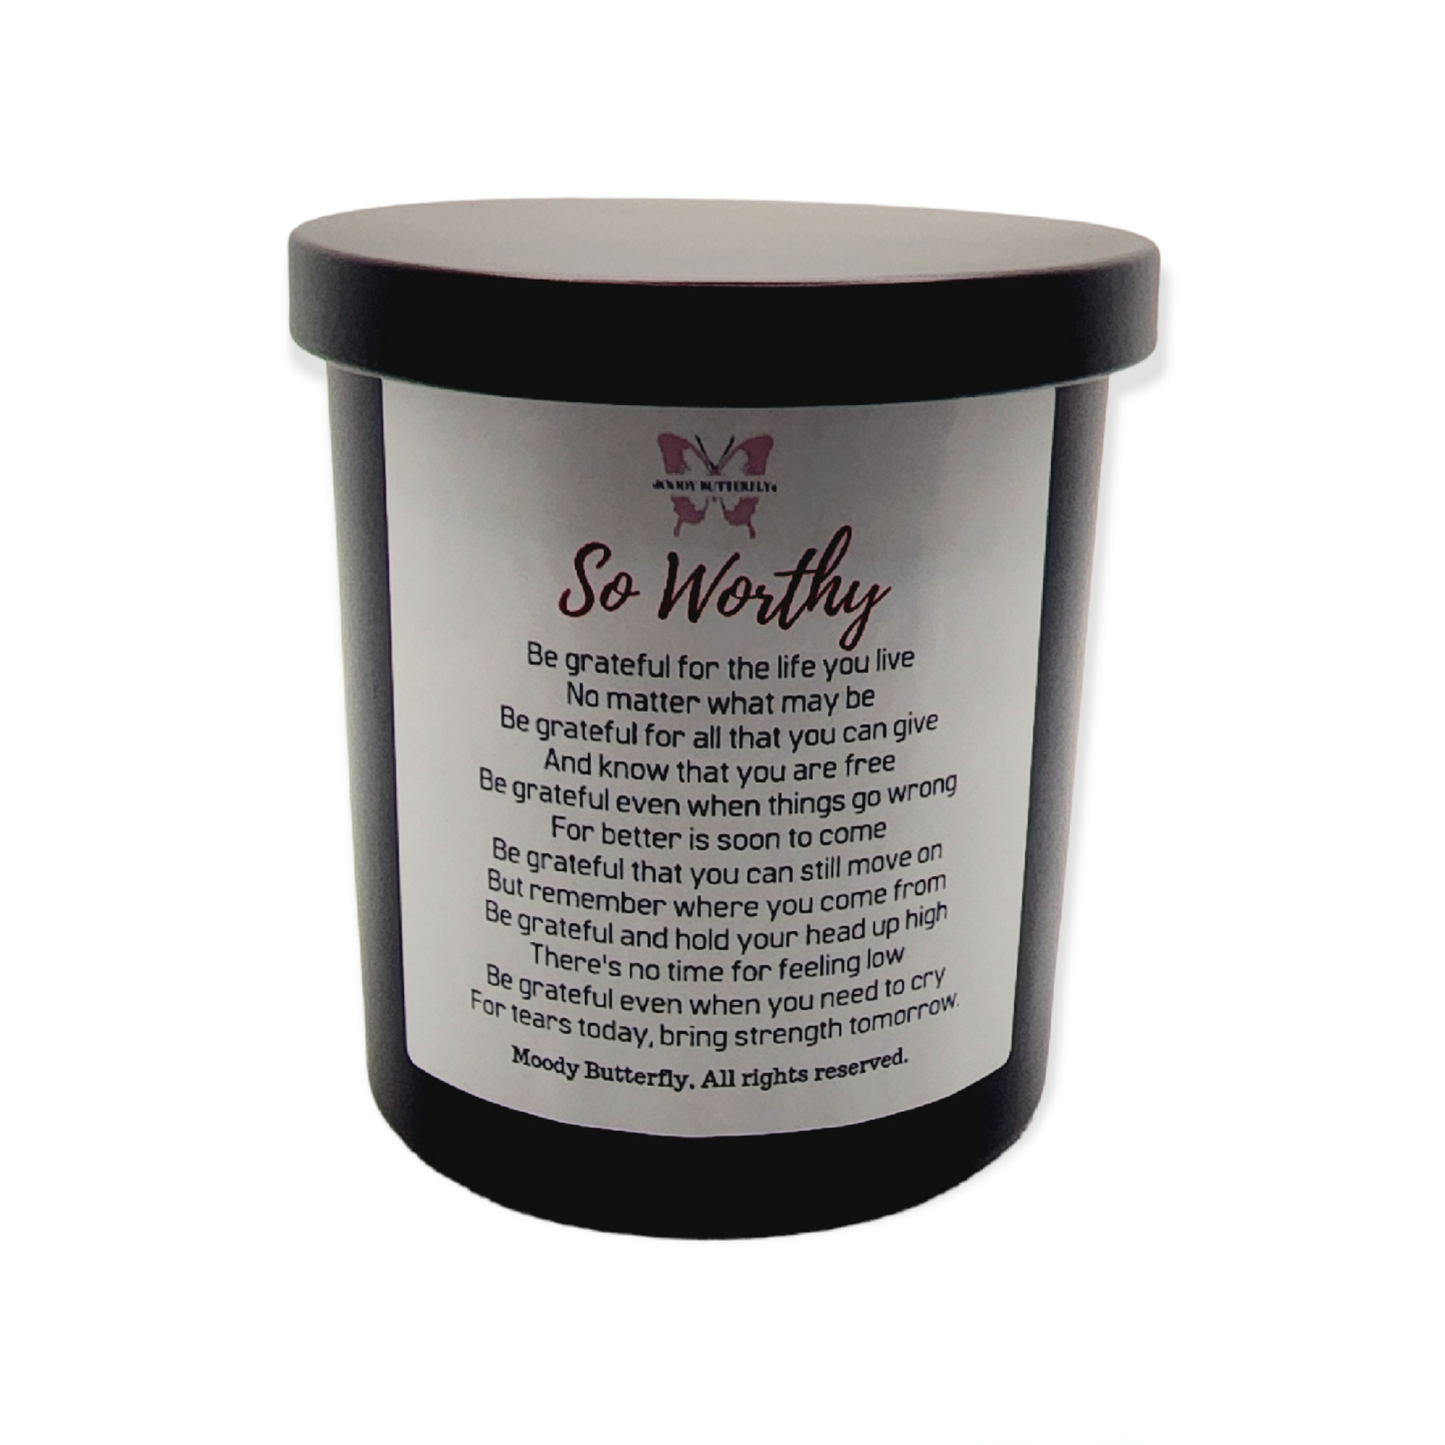 So Worthy Scented Soy Candle (Self-Love) | Verses and Scents Self Acceptance Collection